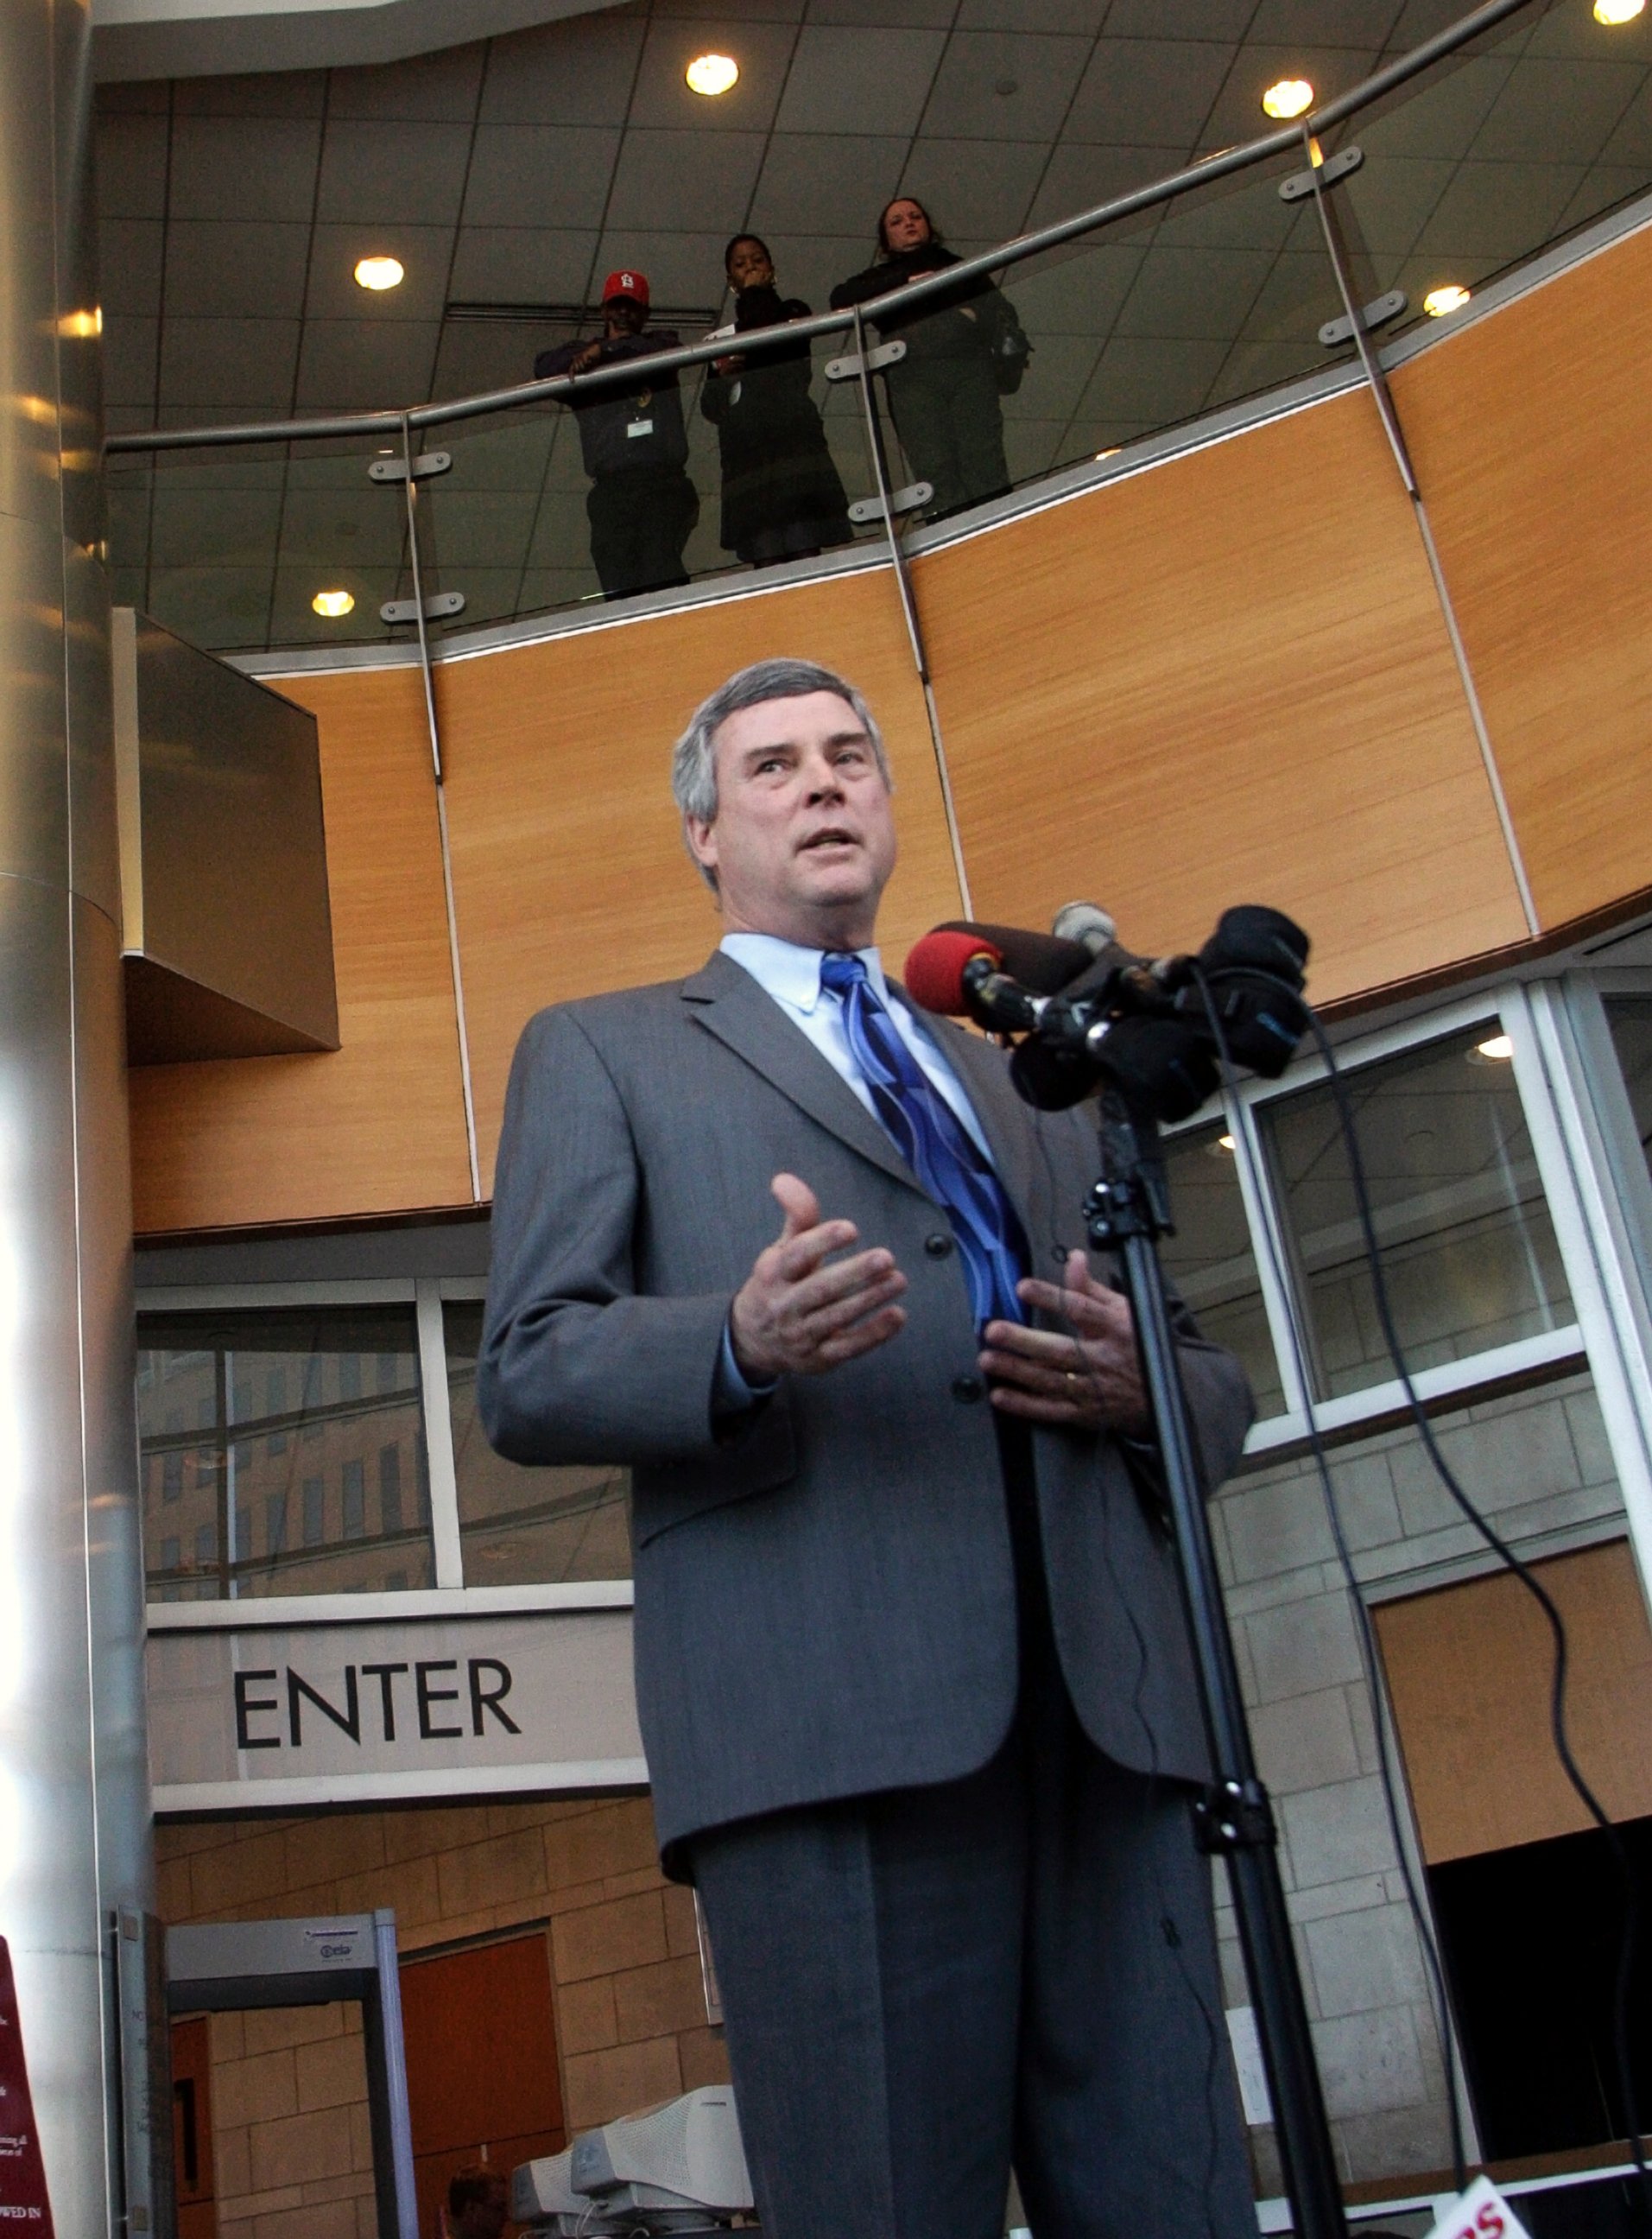 PHOTO: St. Louis County prosecutor Bob McCulloch is seen in this Feb. 10, 2011 file photo in St. Louis.